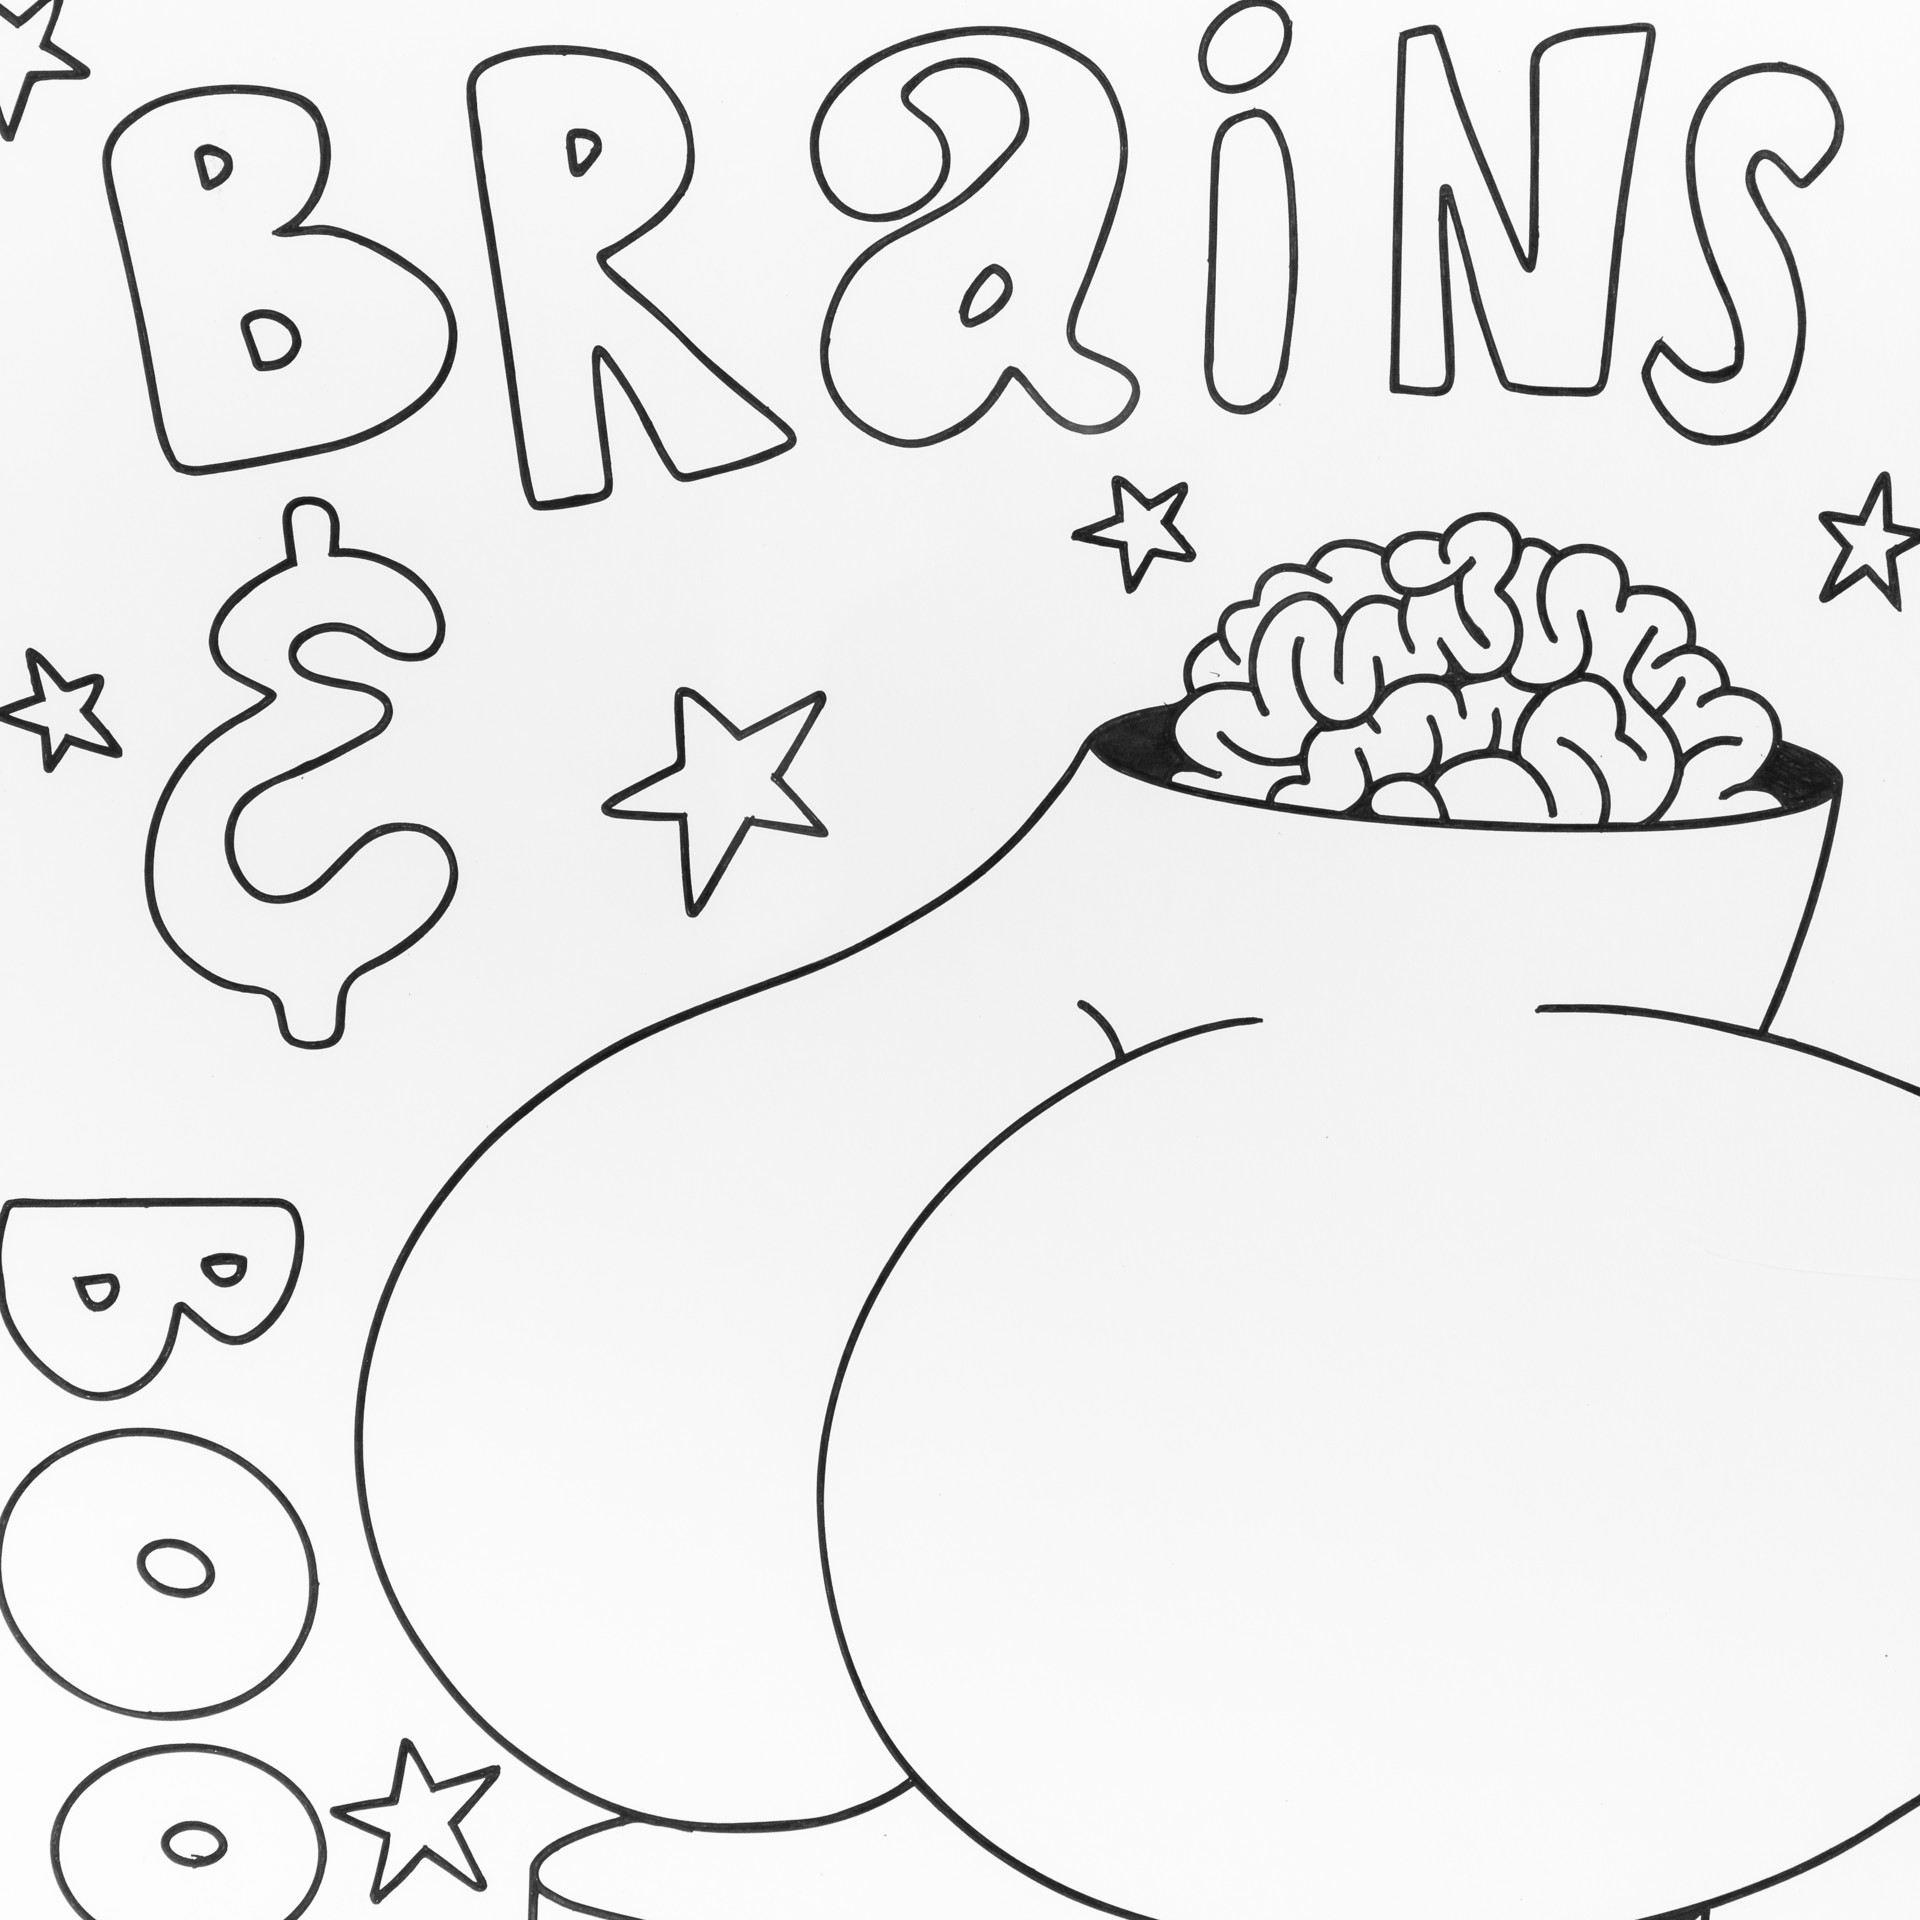 Brains & Booty by Fucci